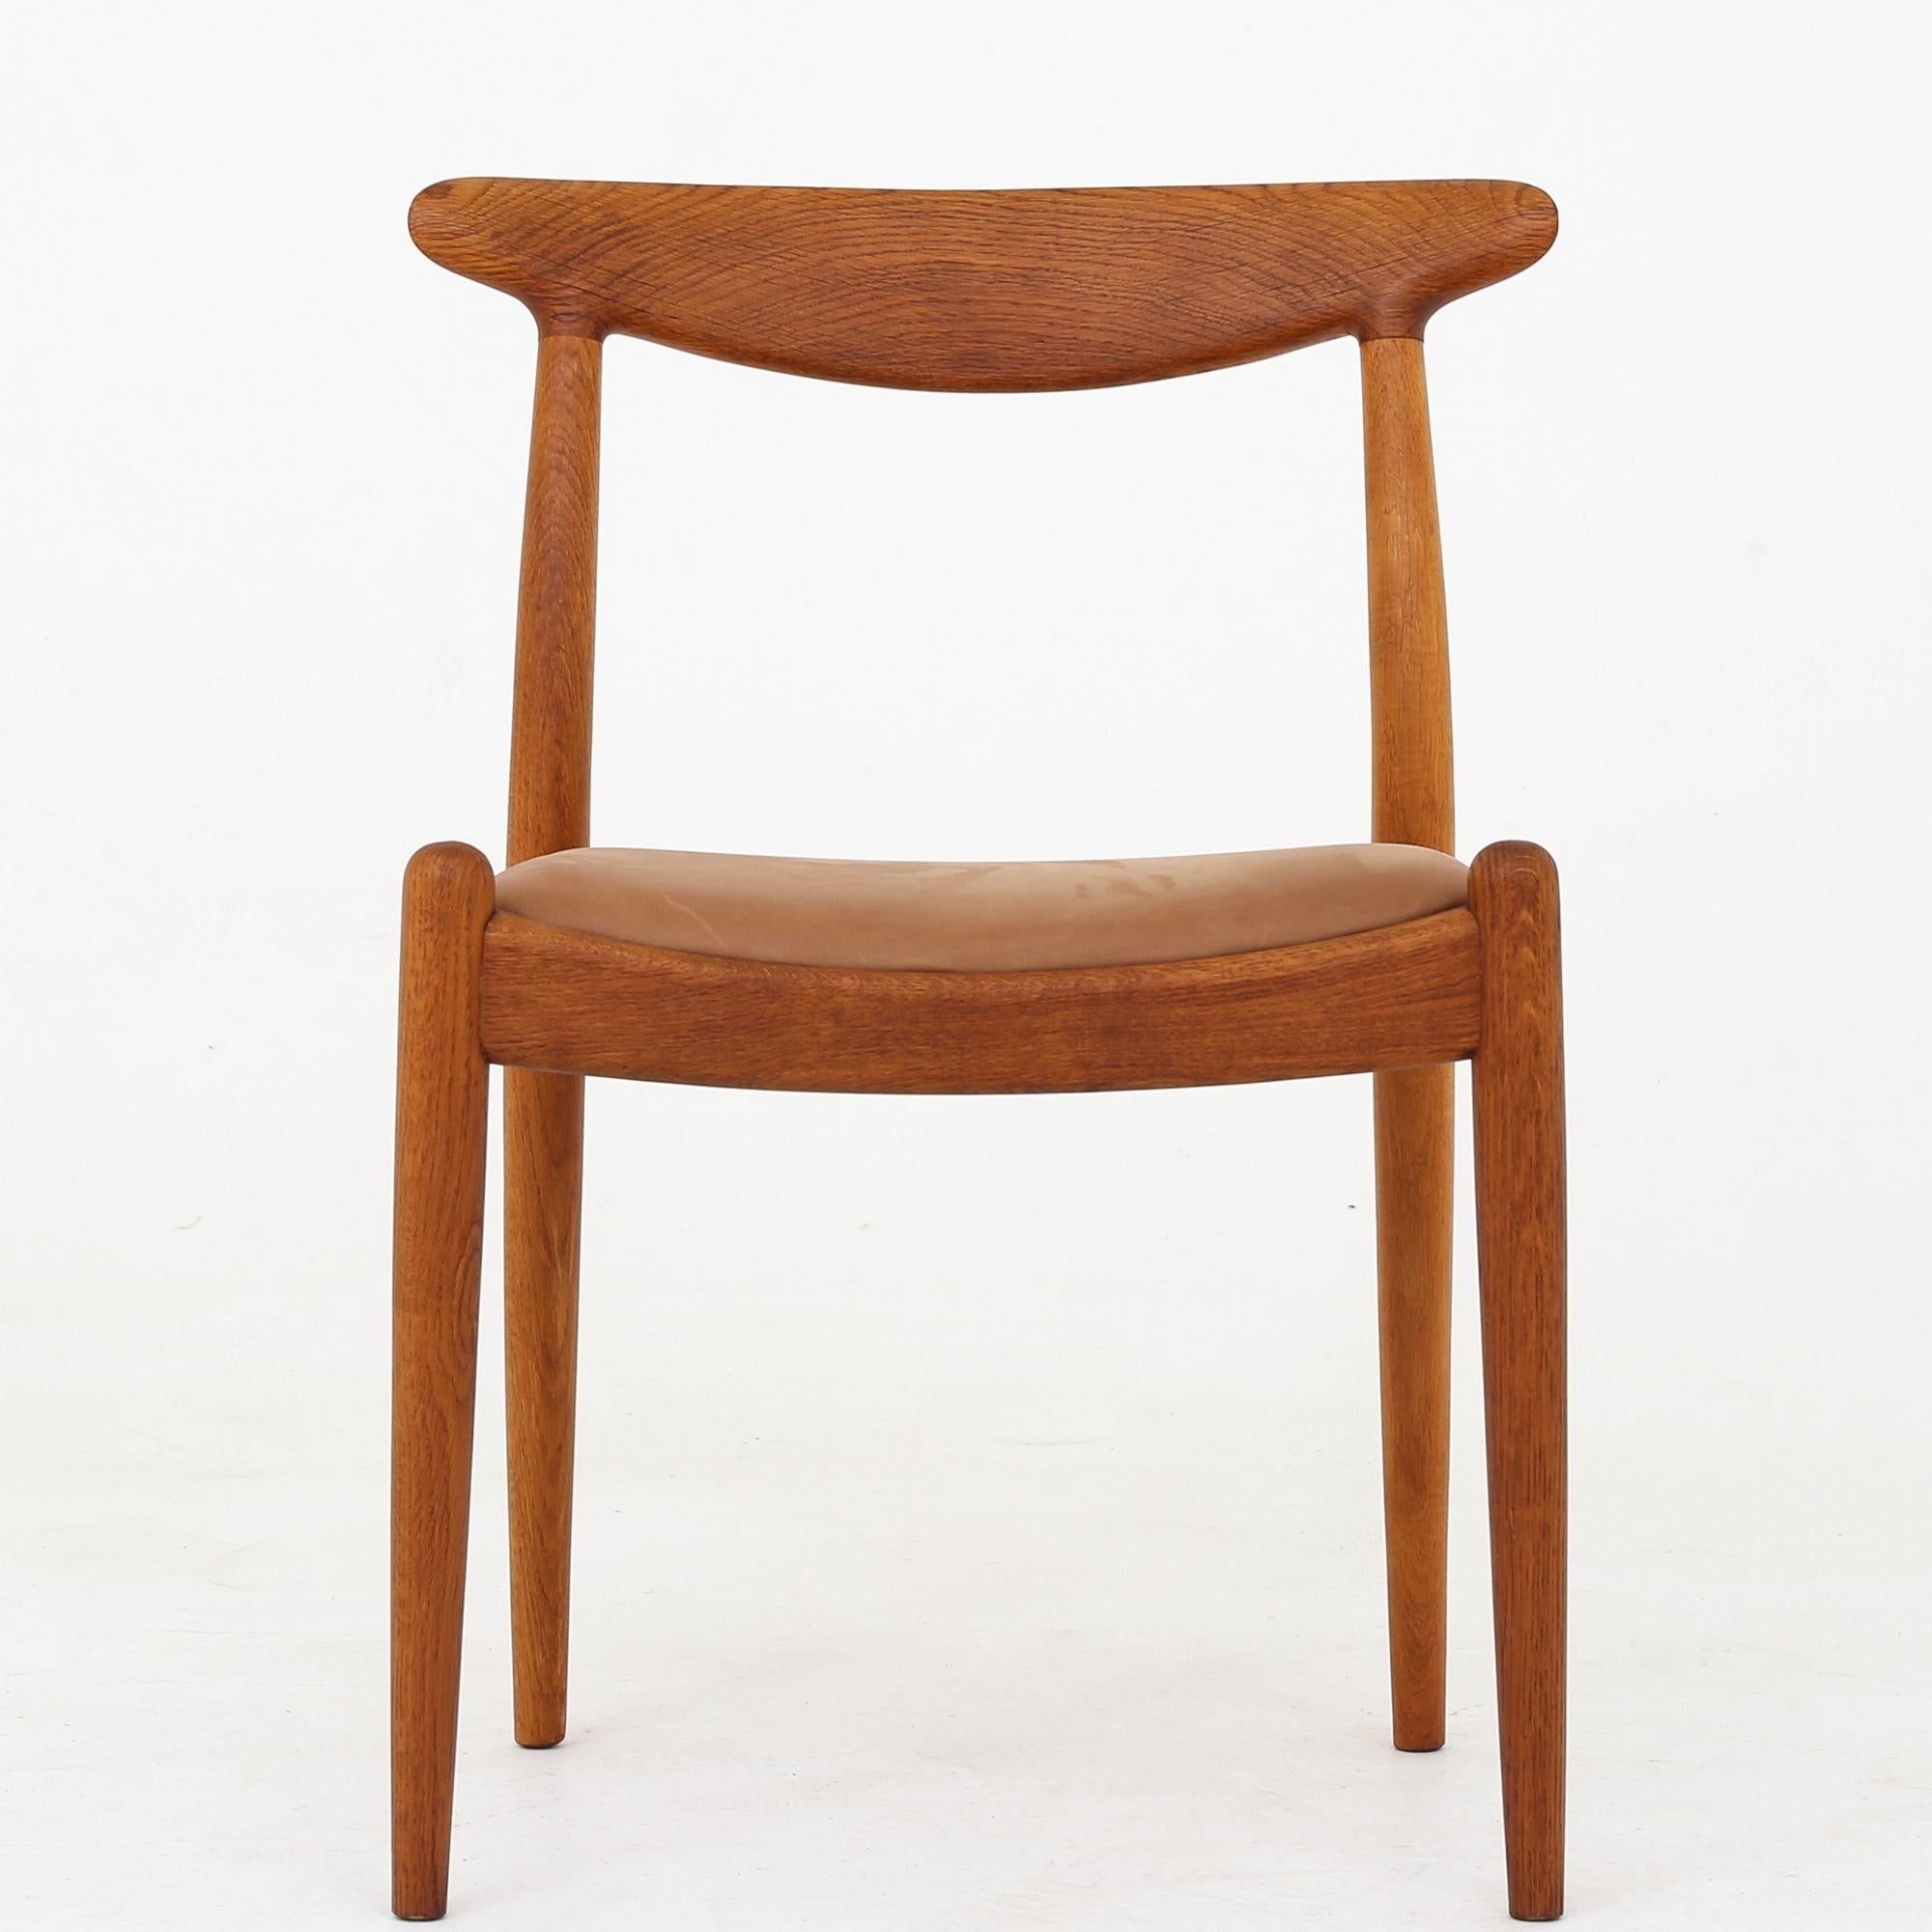 W1 - Set of six dining chairs in oak and reupholstered with Dunes Camel leather. Hans J. Wegner / C. M. Madsen.